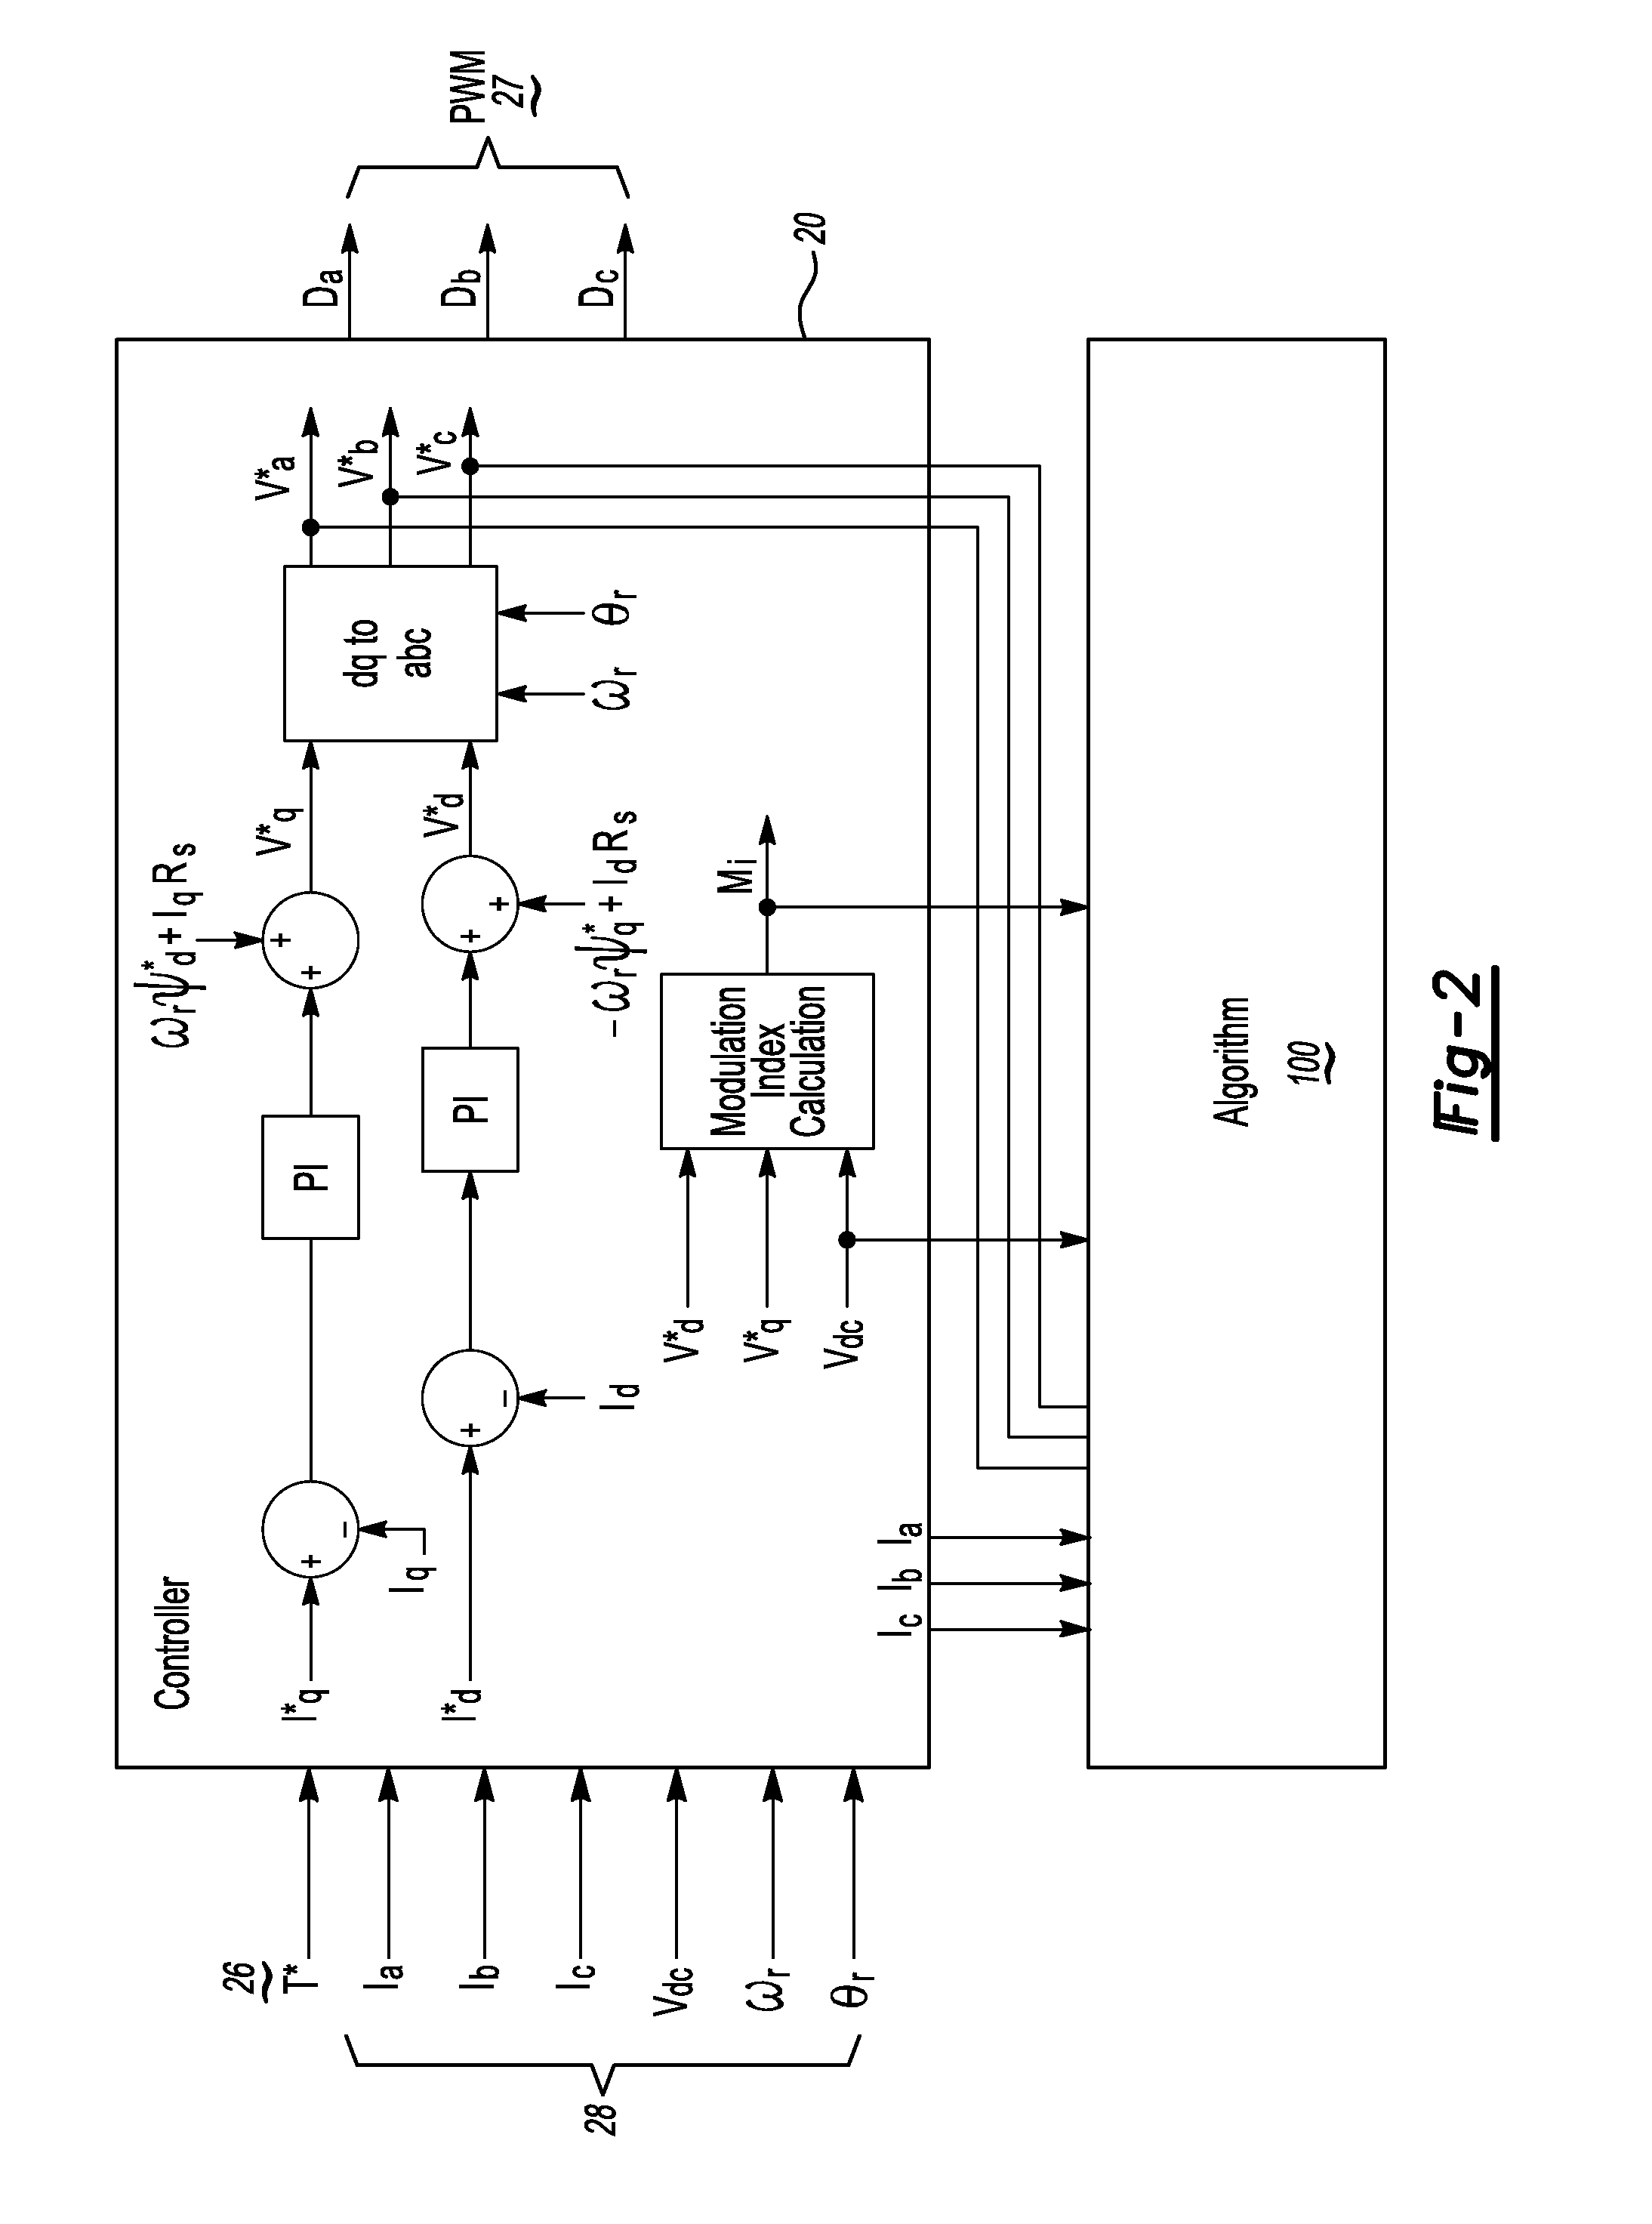 Motor phase winding fault detection method and apparatus